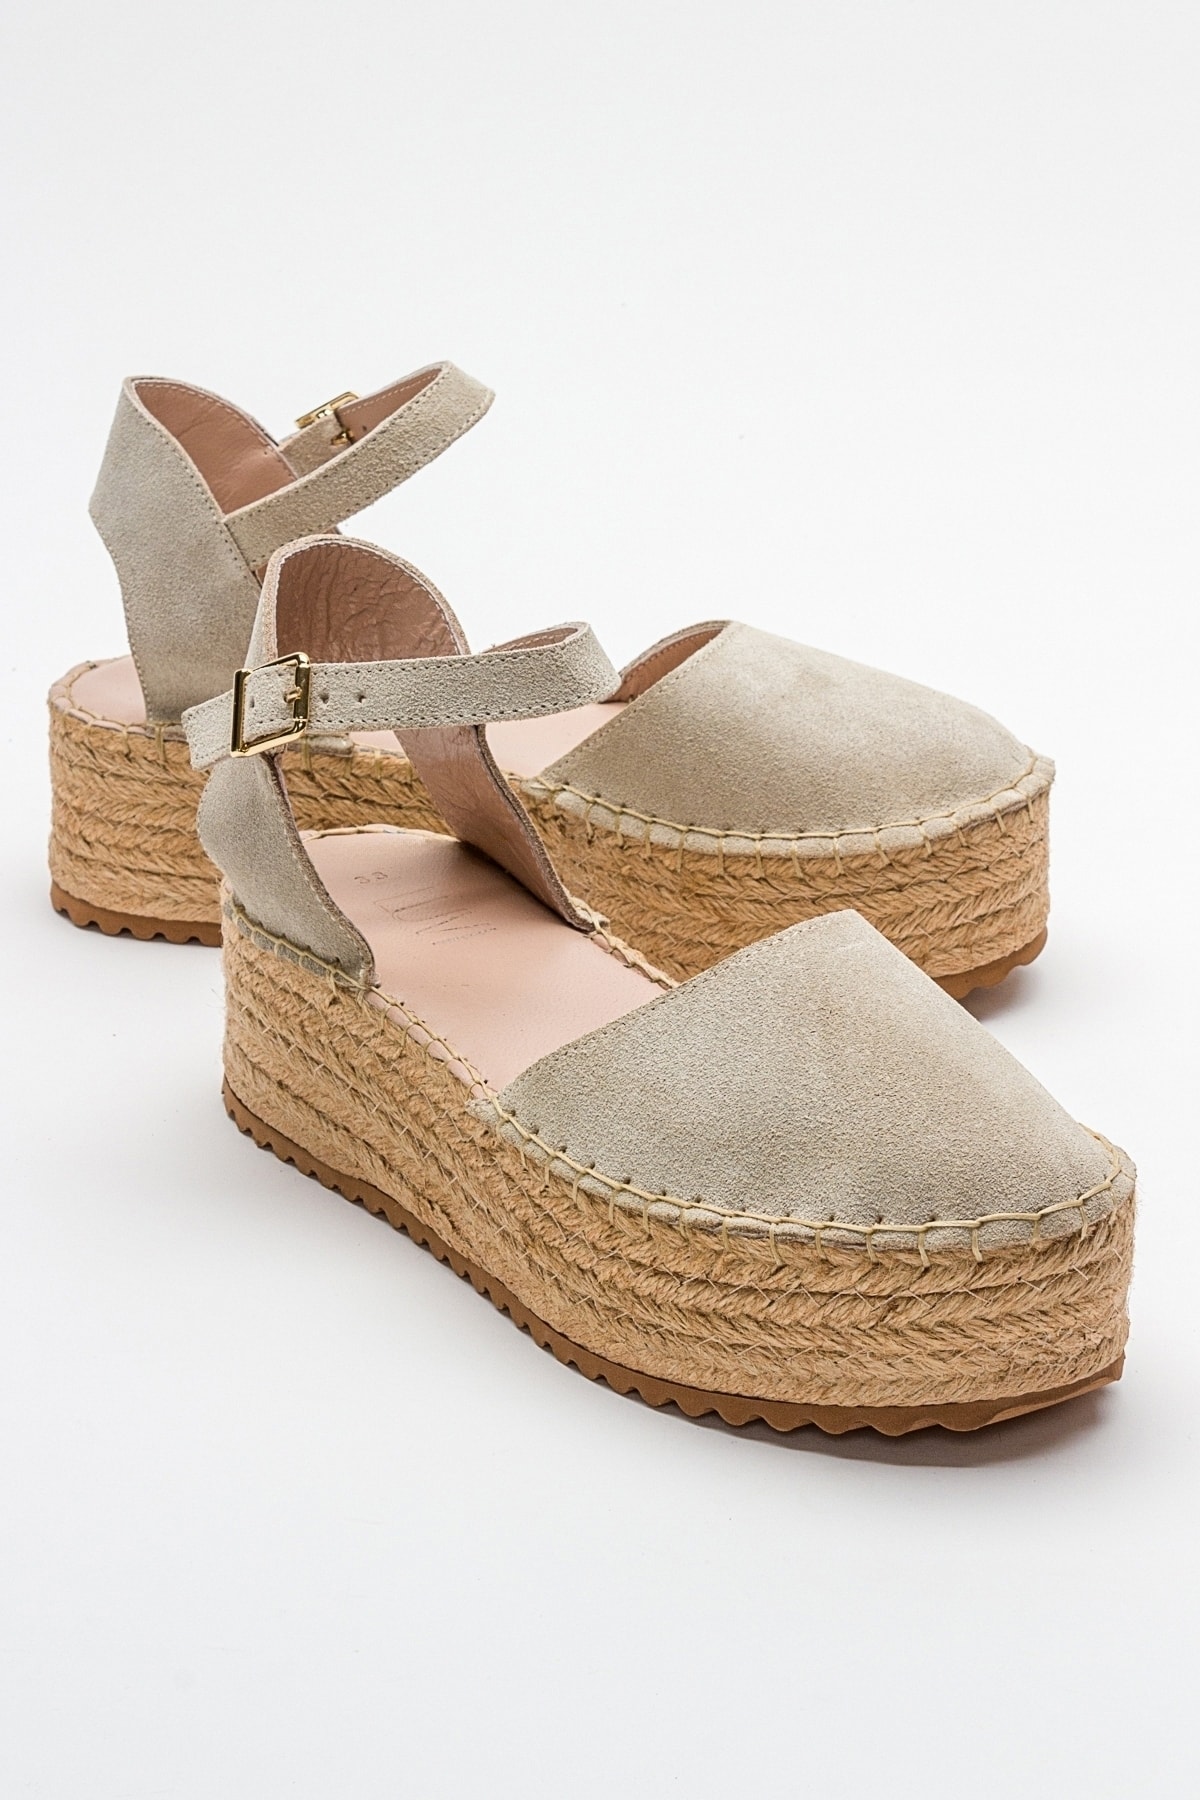 LuviShoes VIBA Women's Beige Suede Genuine Leather Sandals